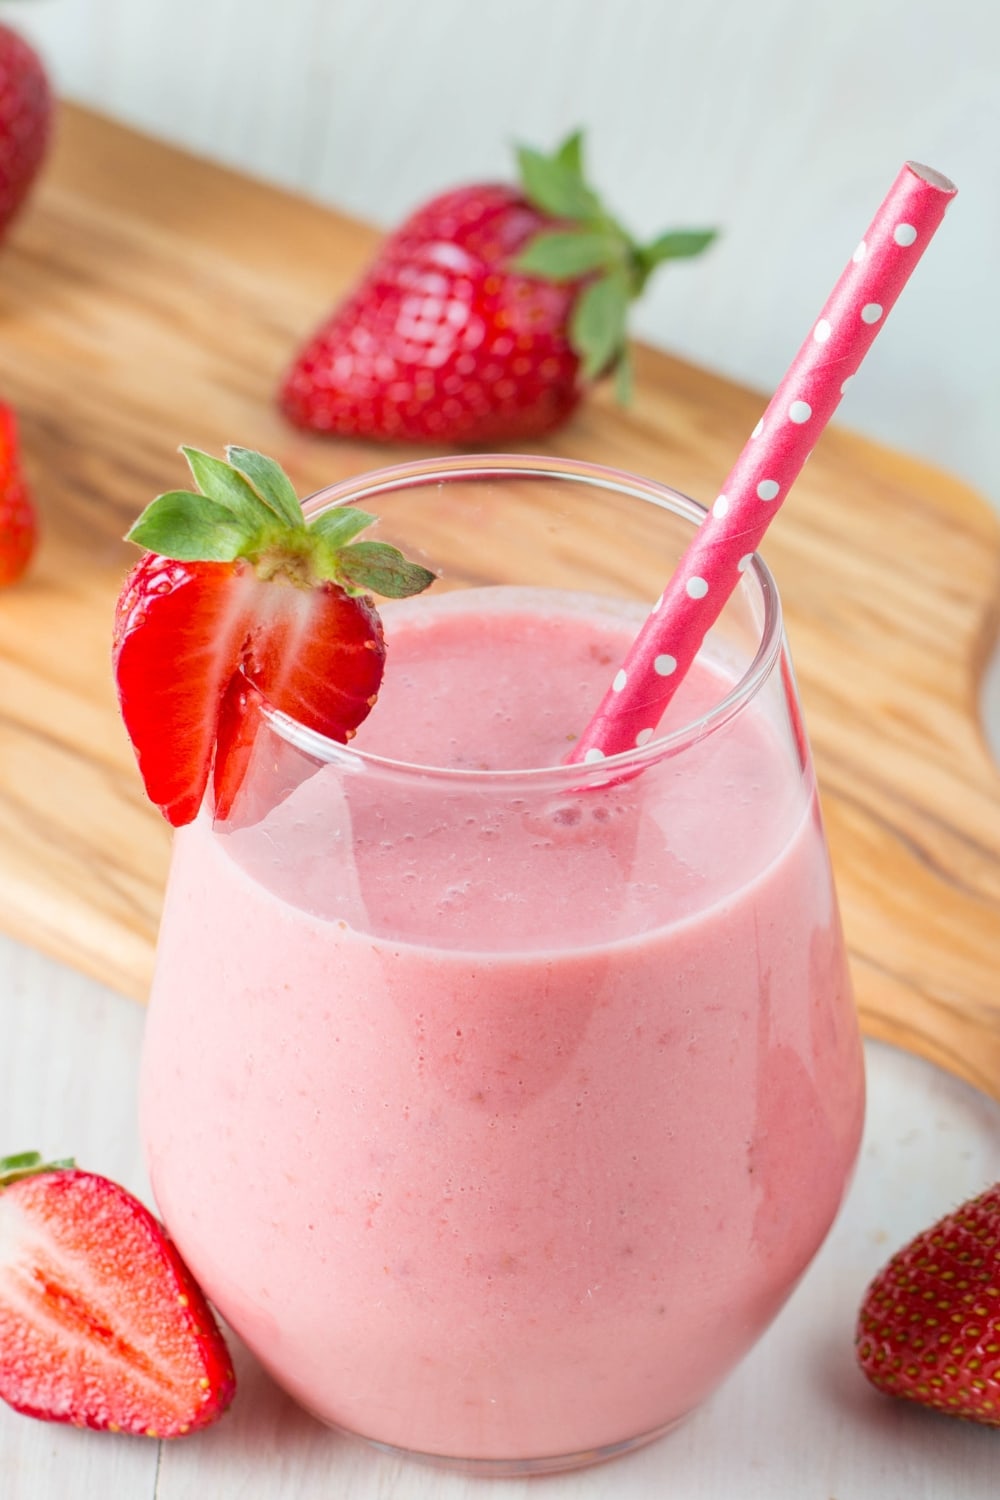 Creamy and Healthy Strawberry Smoothie in a Glass with a Pink Polka Dot Straw and a Sliced Strawberry Garnish with a Cutting Board in the Background and Fresh Strawberries Around